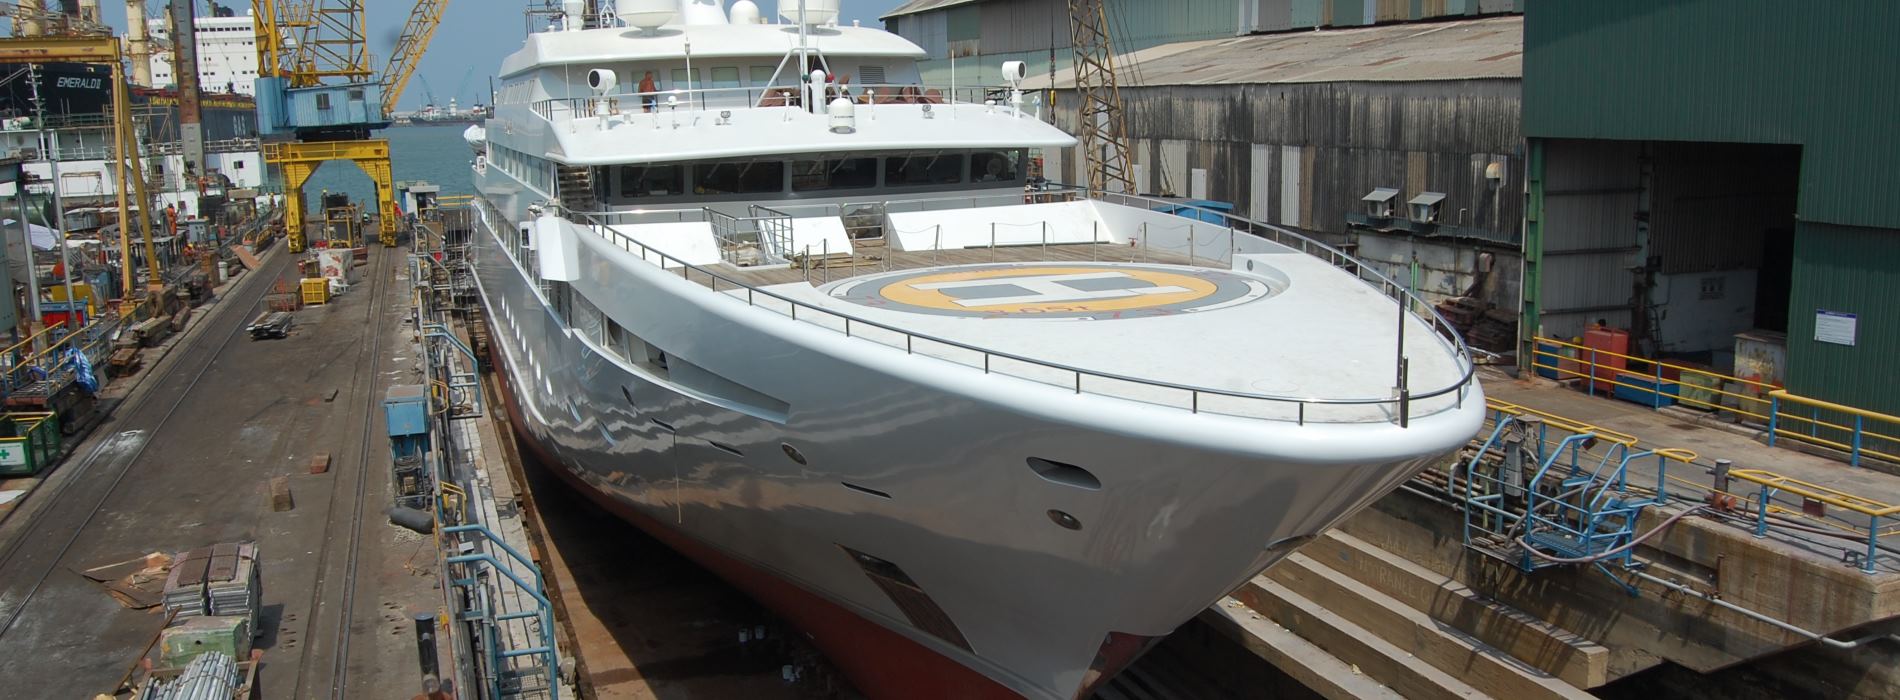 GULF CRAFT LAUNCHES WORLD’S LARGEST COMPOSITE YACHT (2020)